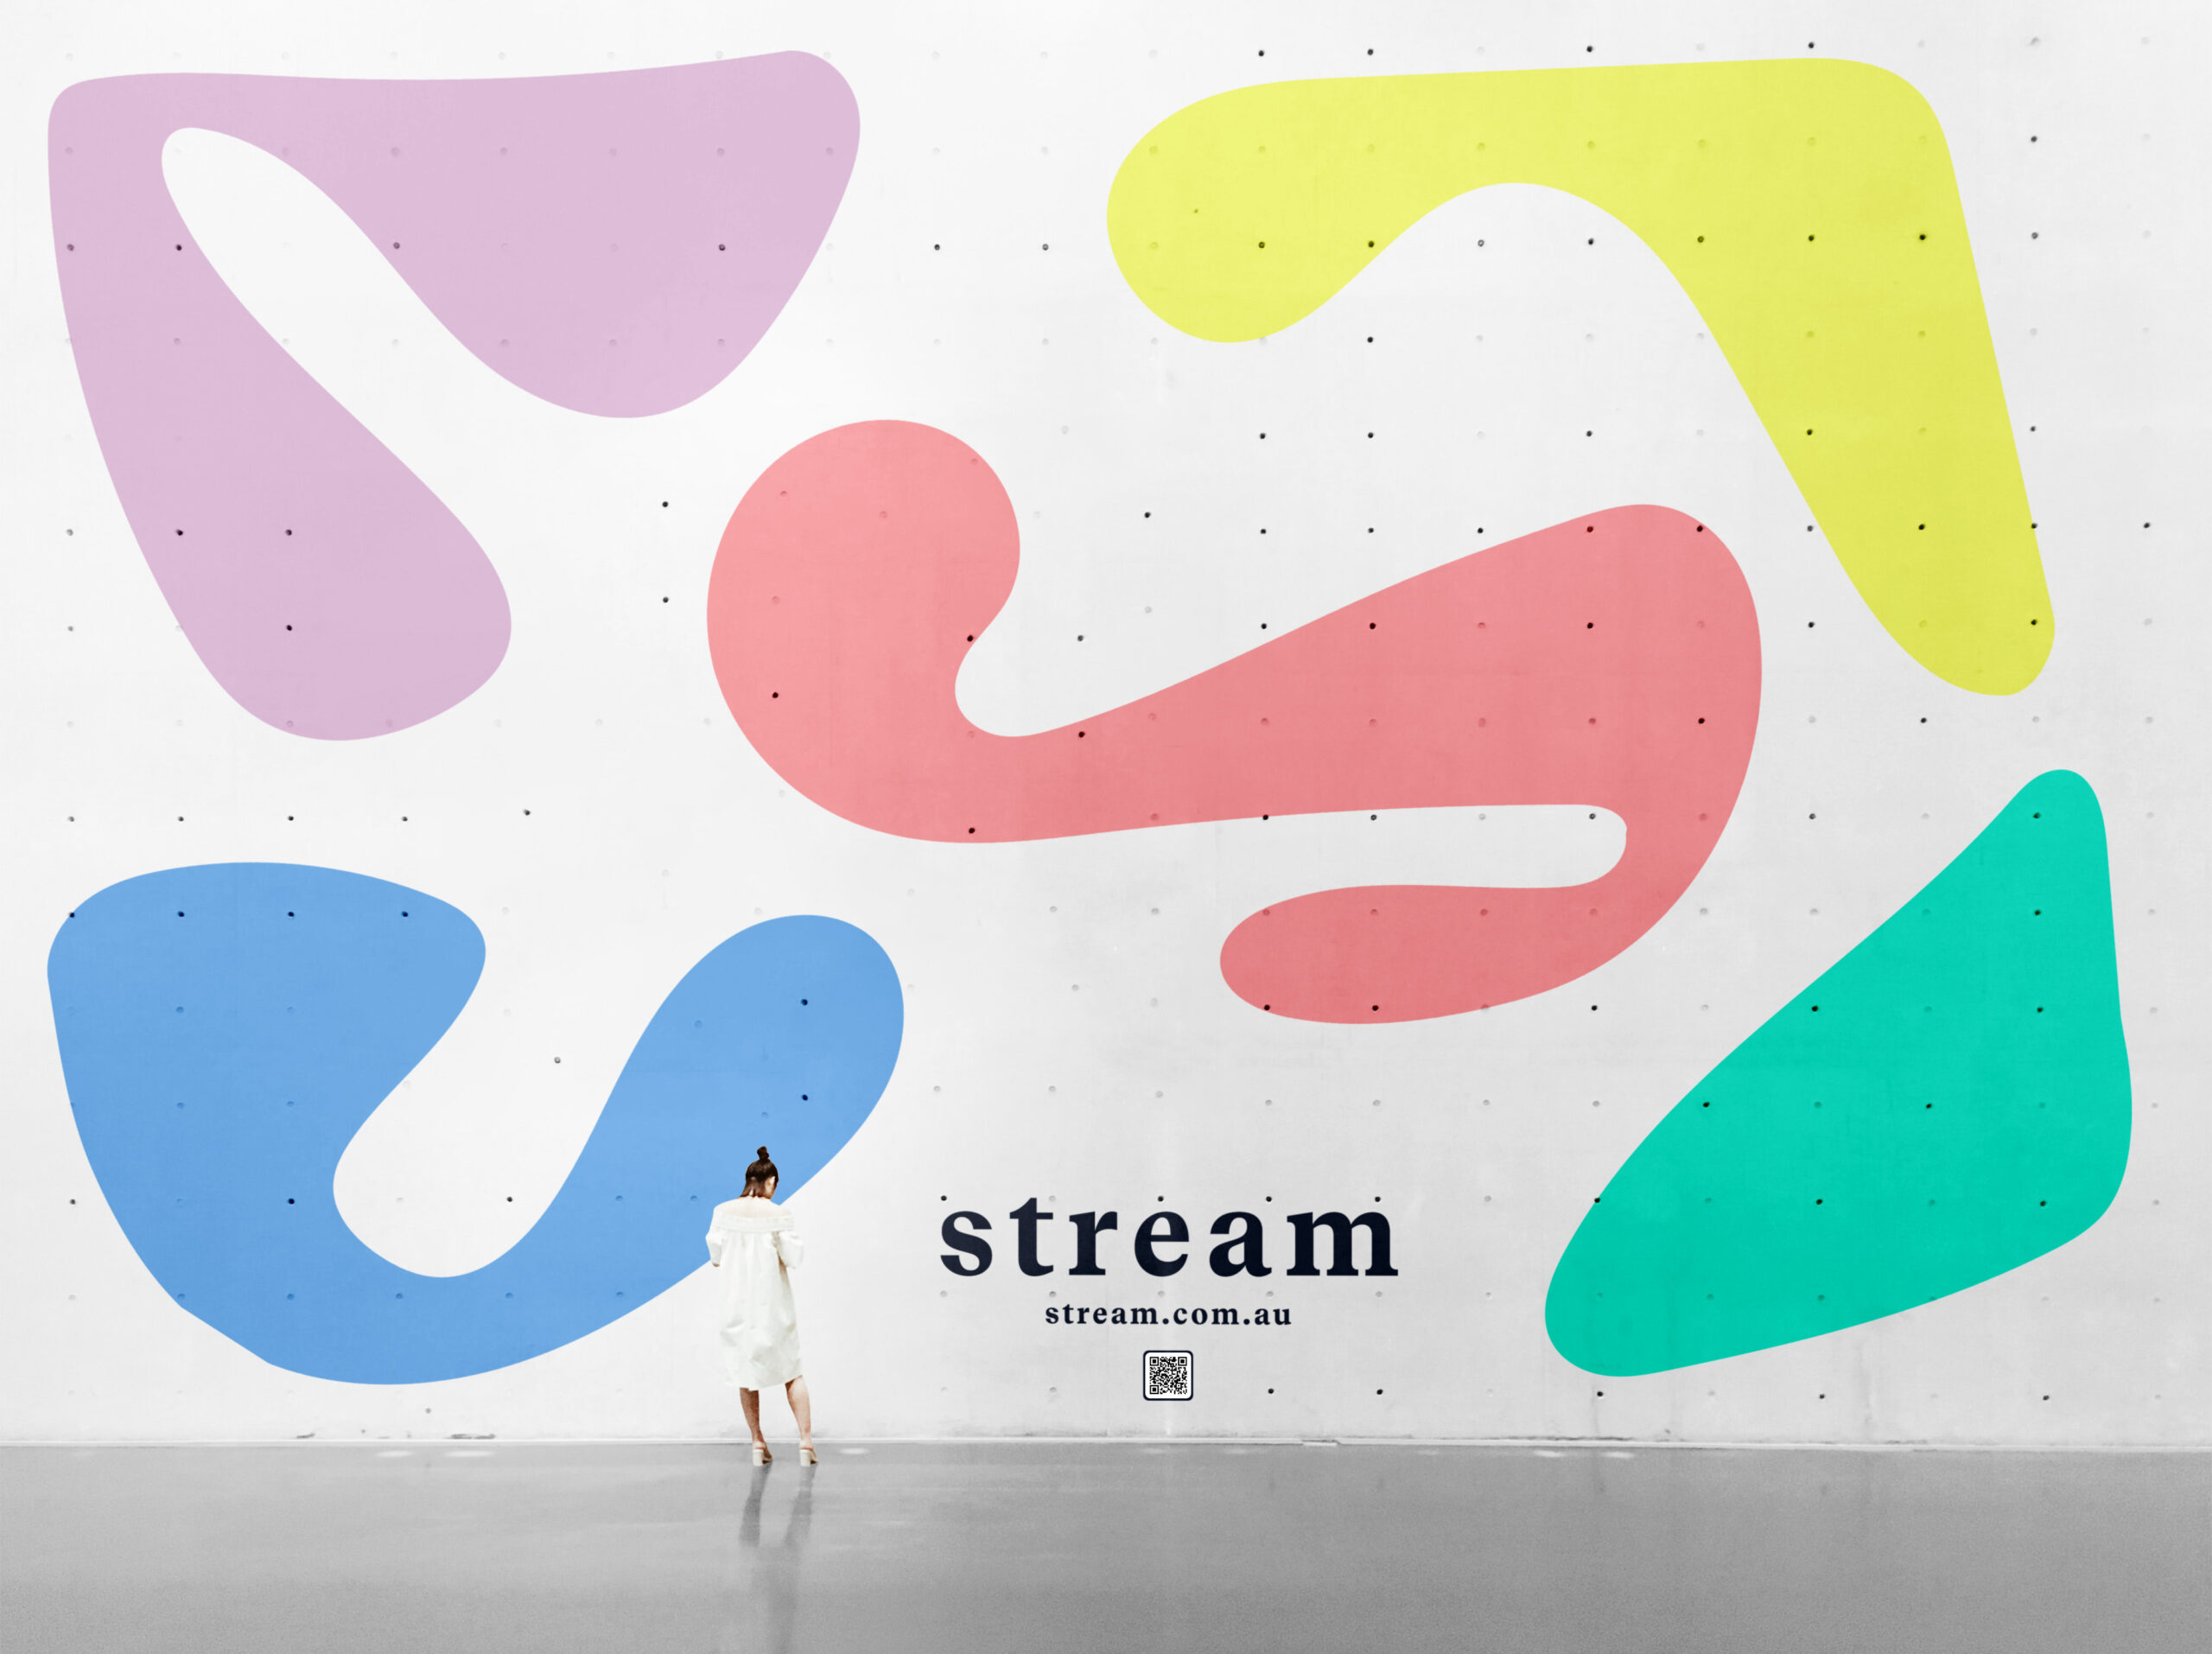 Stream wall installation, brand shapes in a pattern on a concrete wall